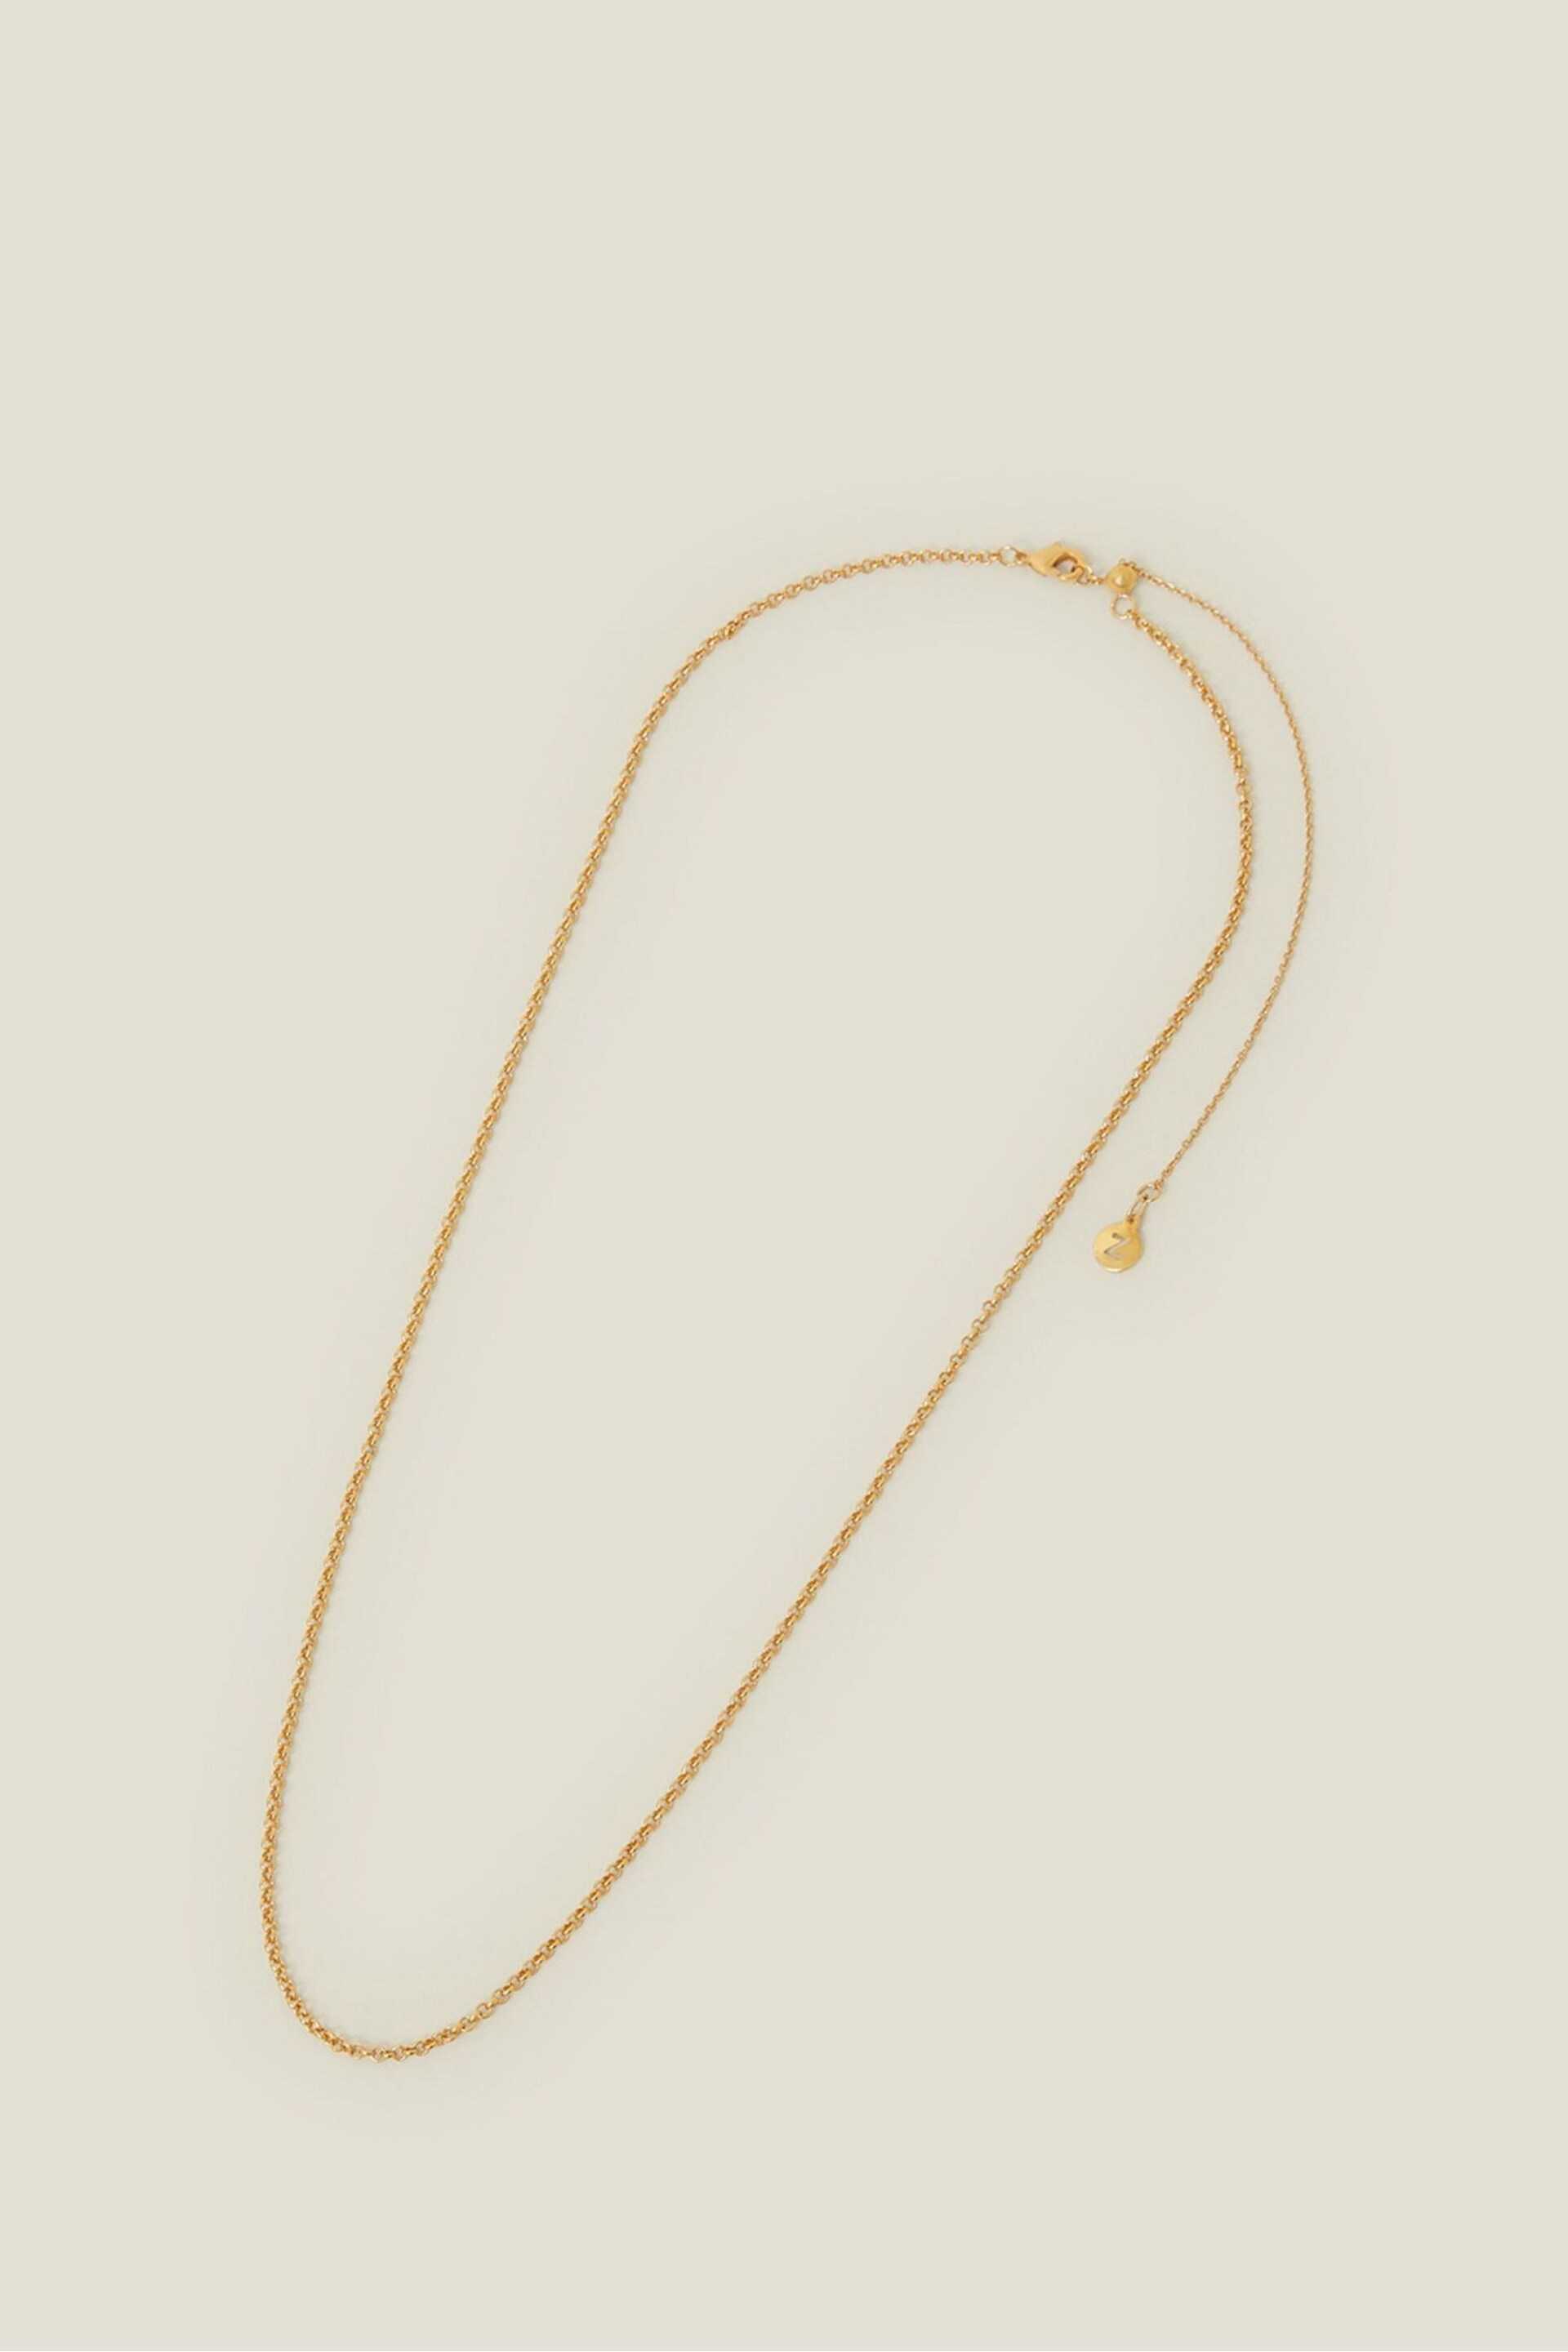 Accessorize 14ct Gold Plated Belcher Chain Necklace - Image 1 of 3